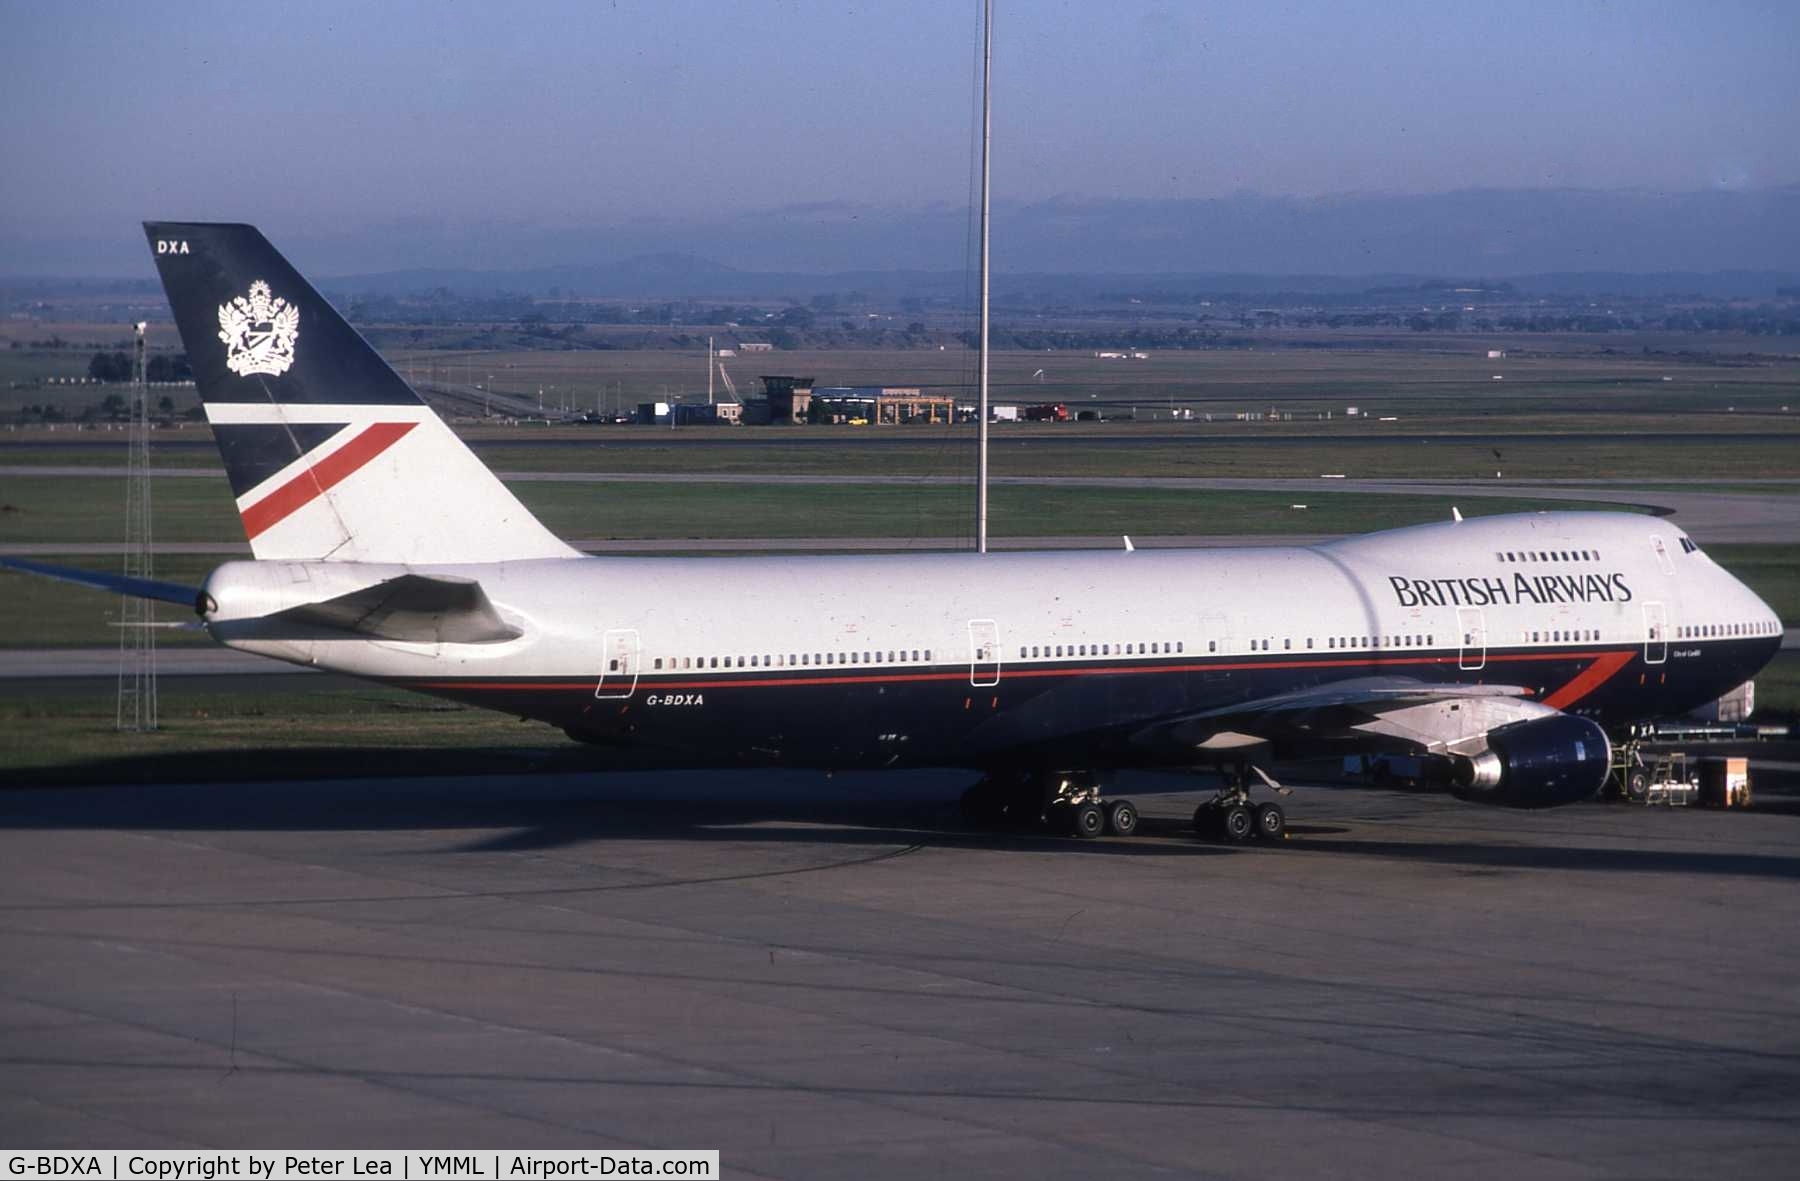 G-BDXA, 1977 Boeing 747-236B C/N 21238, Photographed at Melbourne in the early 1980's